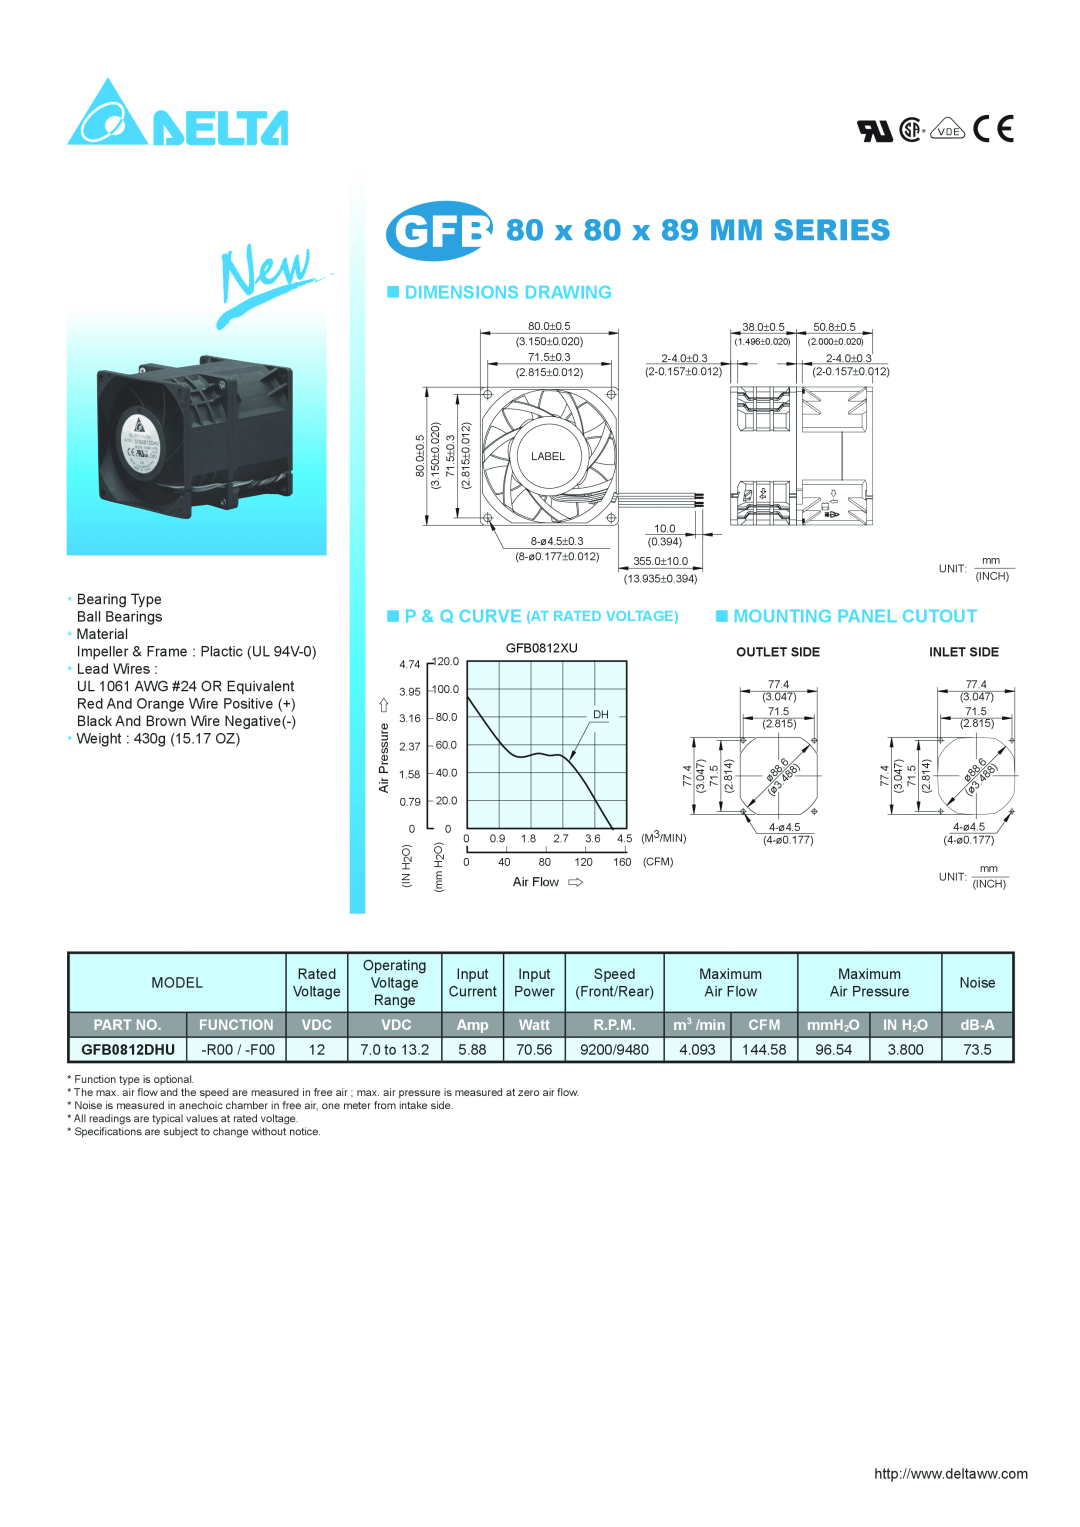 Delta Electronics GFB0812DHU dimensions GFB 80 x 80 x 89 MM SERIES, Dimensions Drawing, Function, IN H2O 